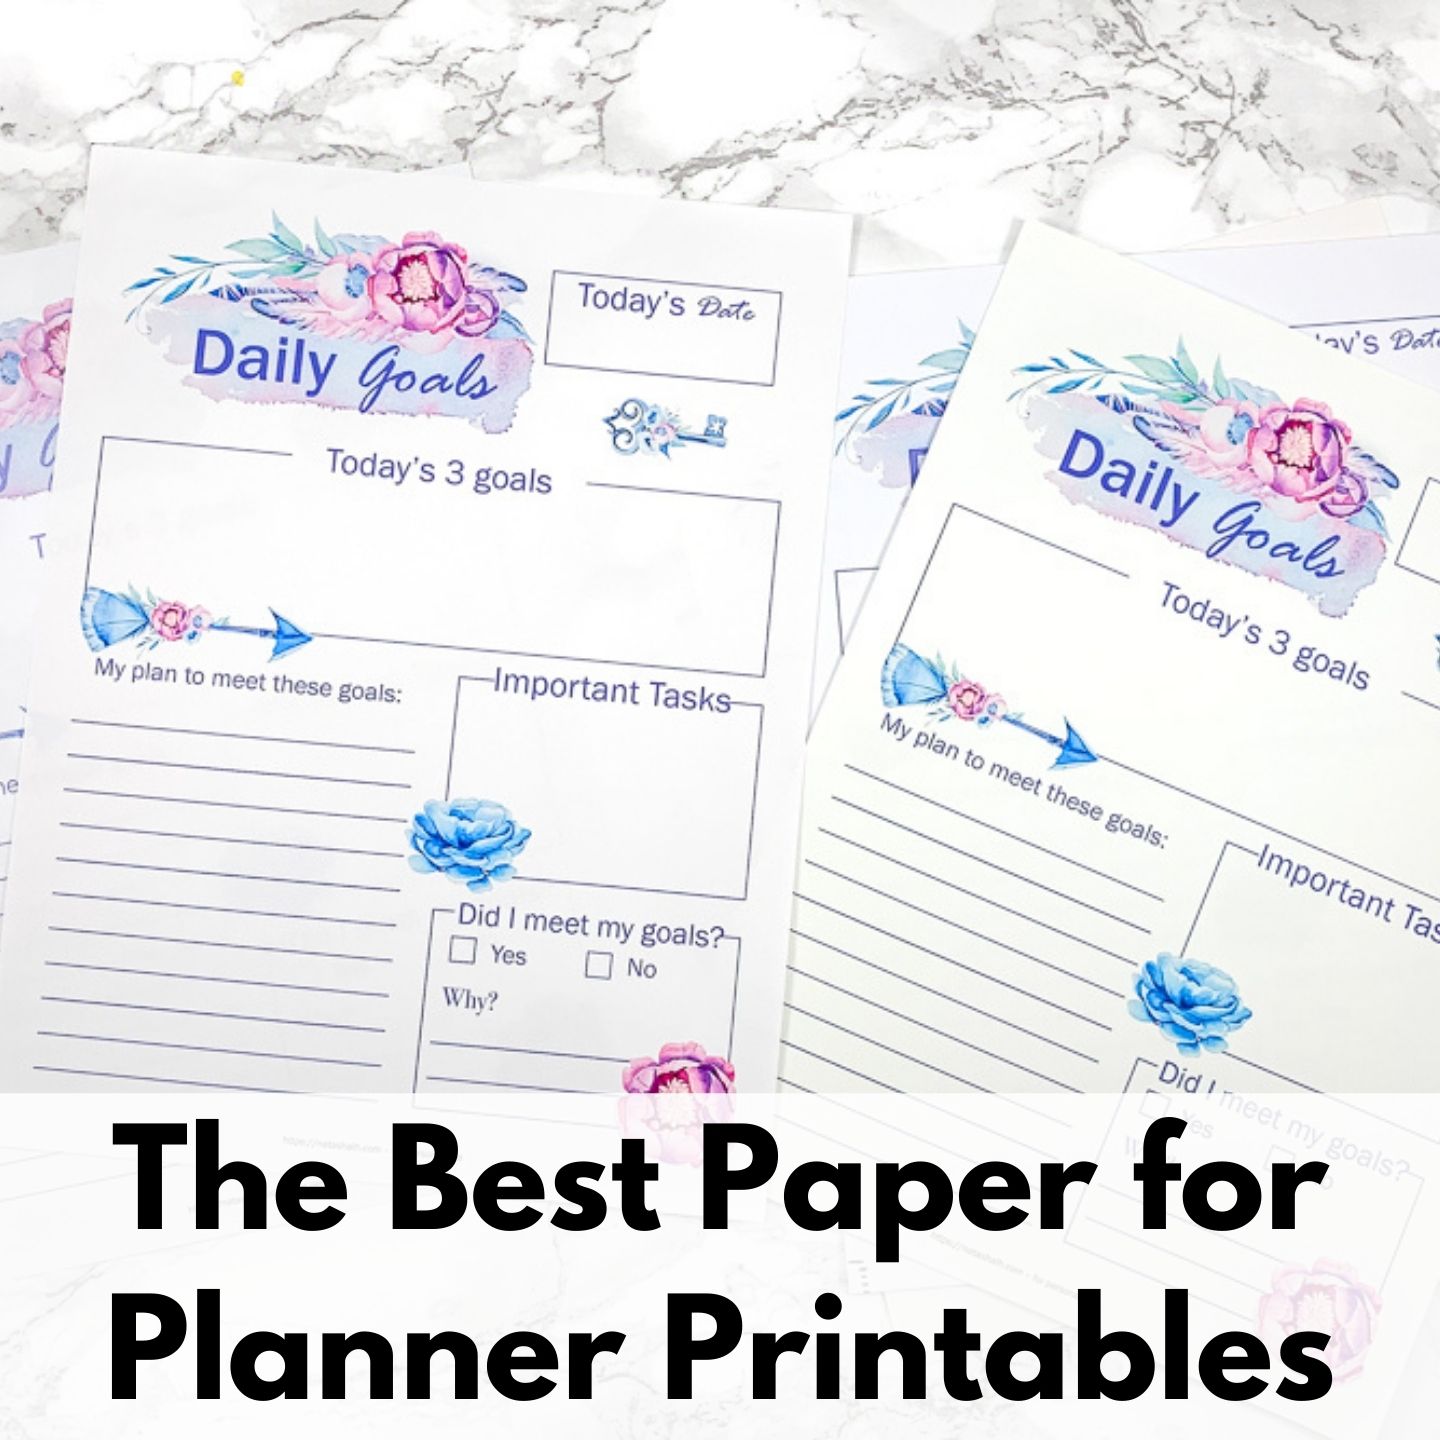 Planner Q&A: Personal Wide Inserts in a Personal Planner? Paper I Use For  Printables? 